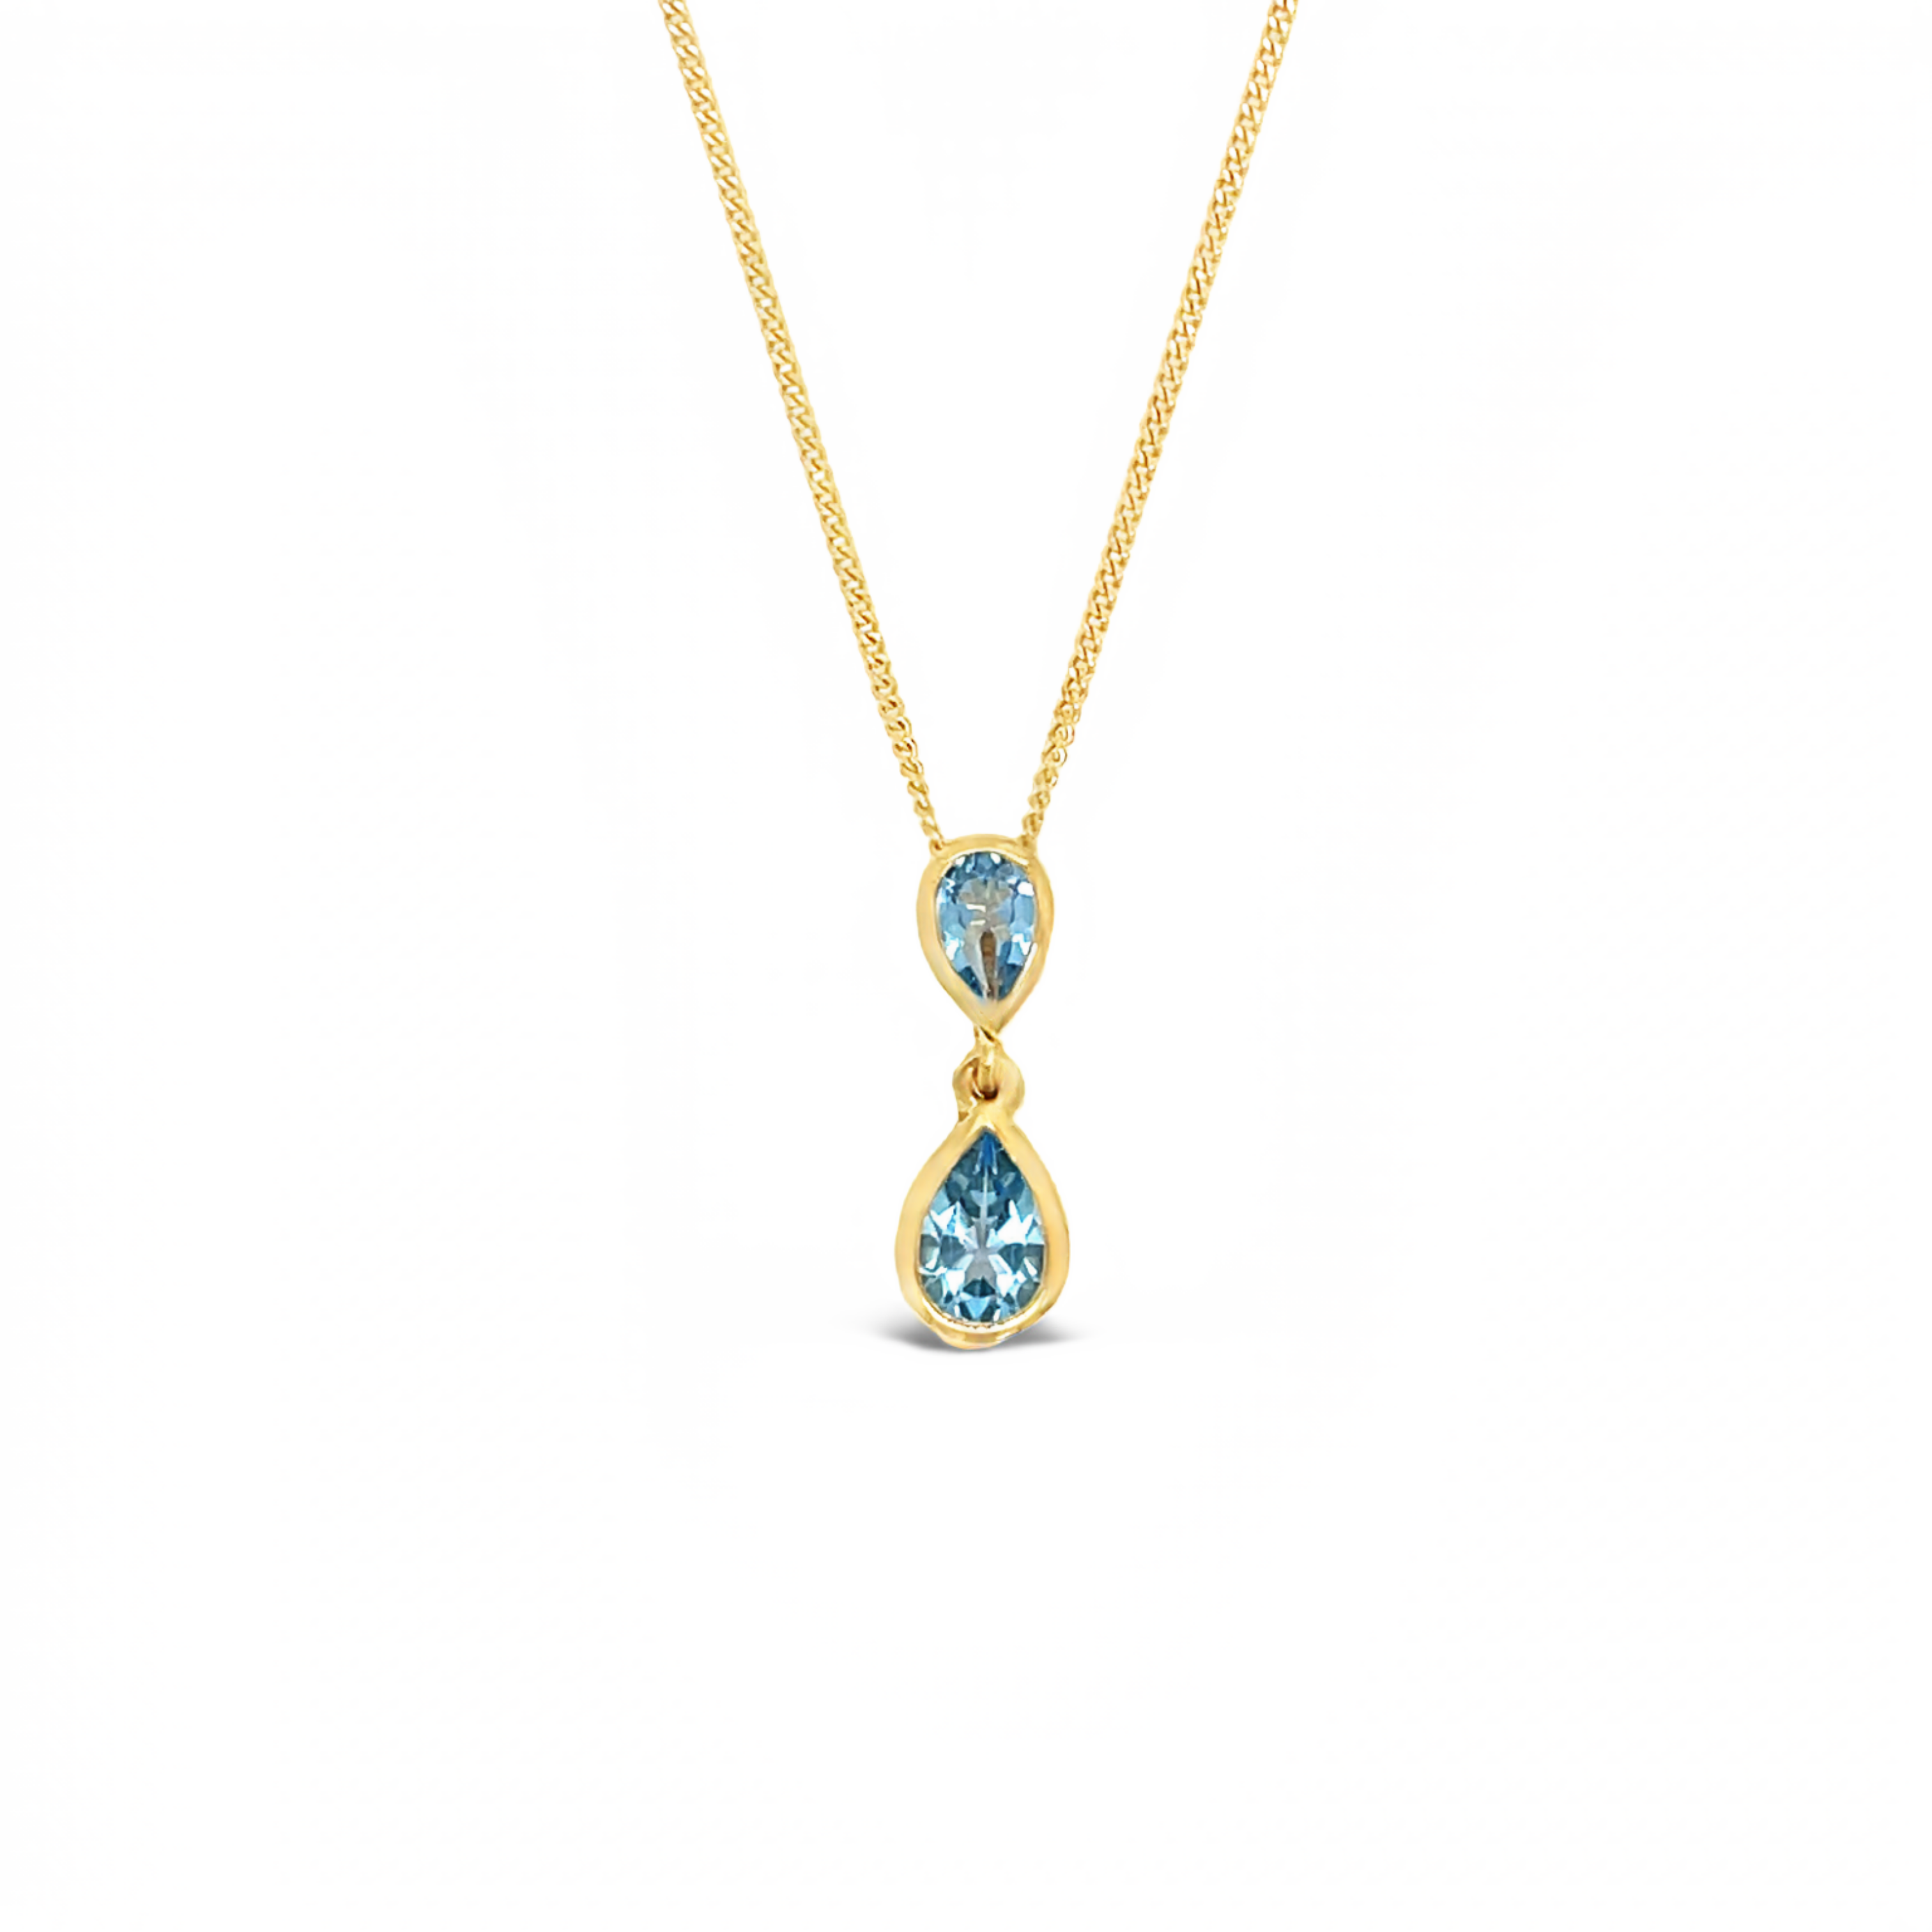 9ct Yellow Gold Teardrop Blue Topaz Pendant and Chain